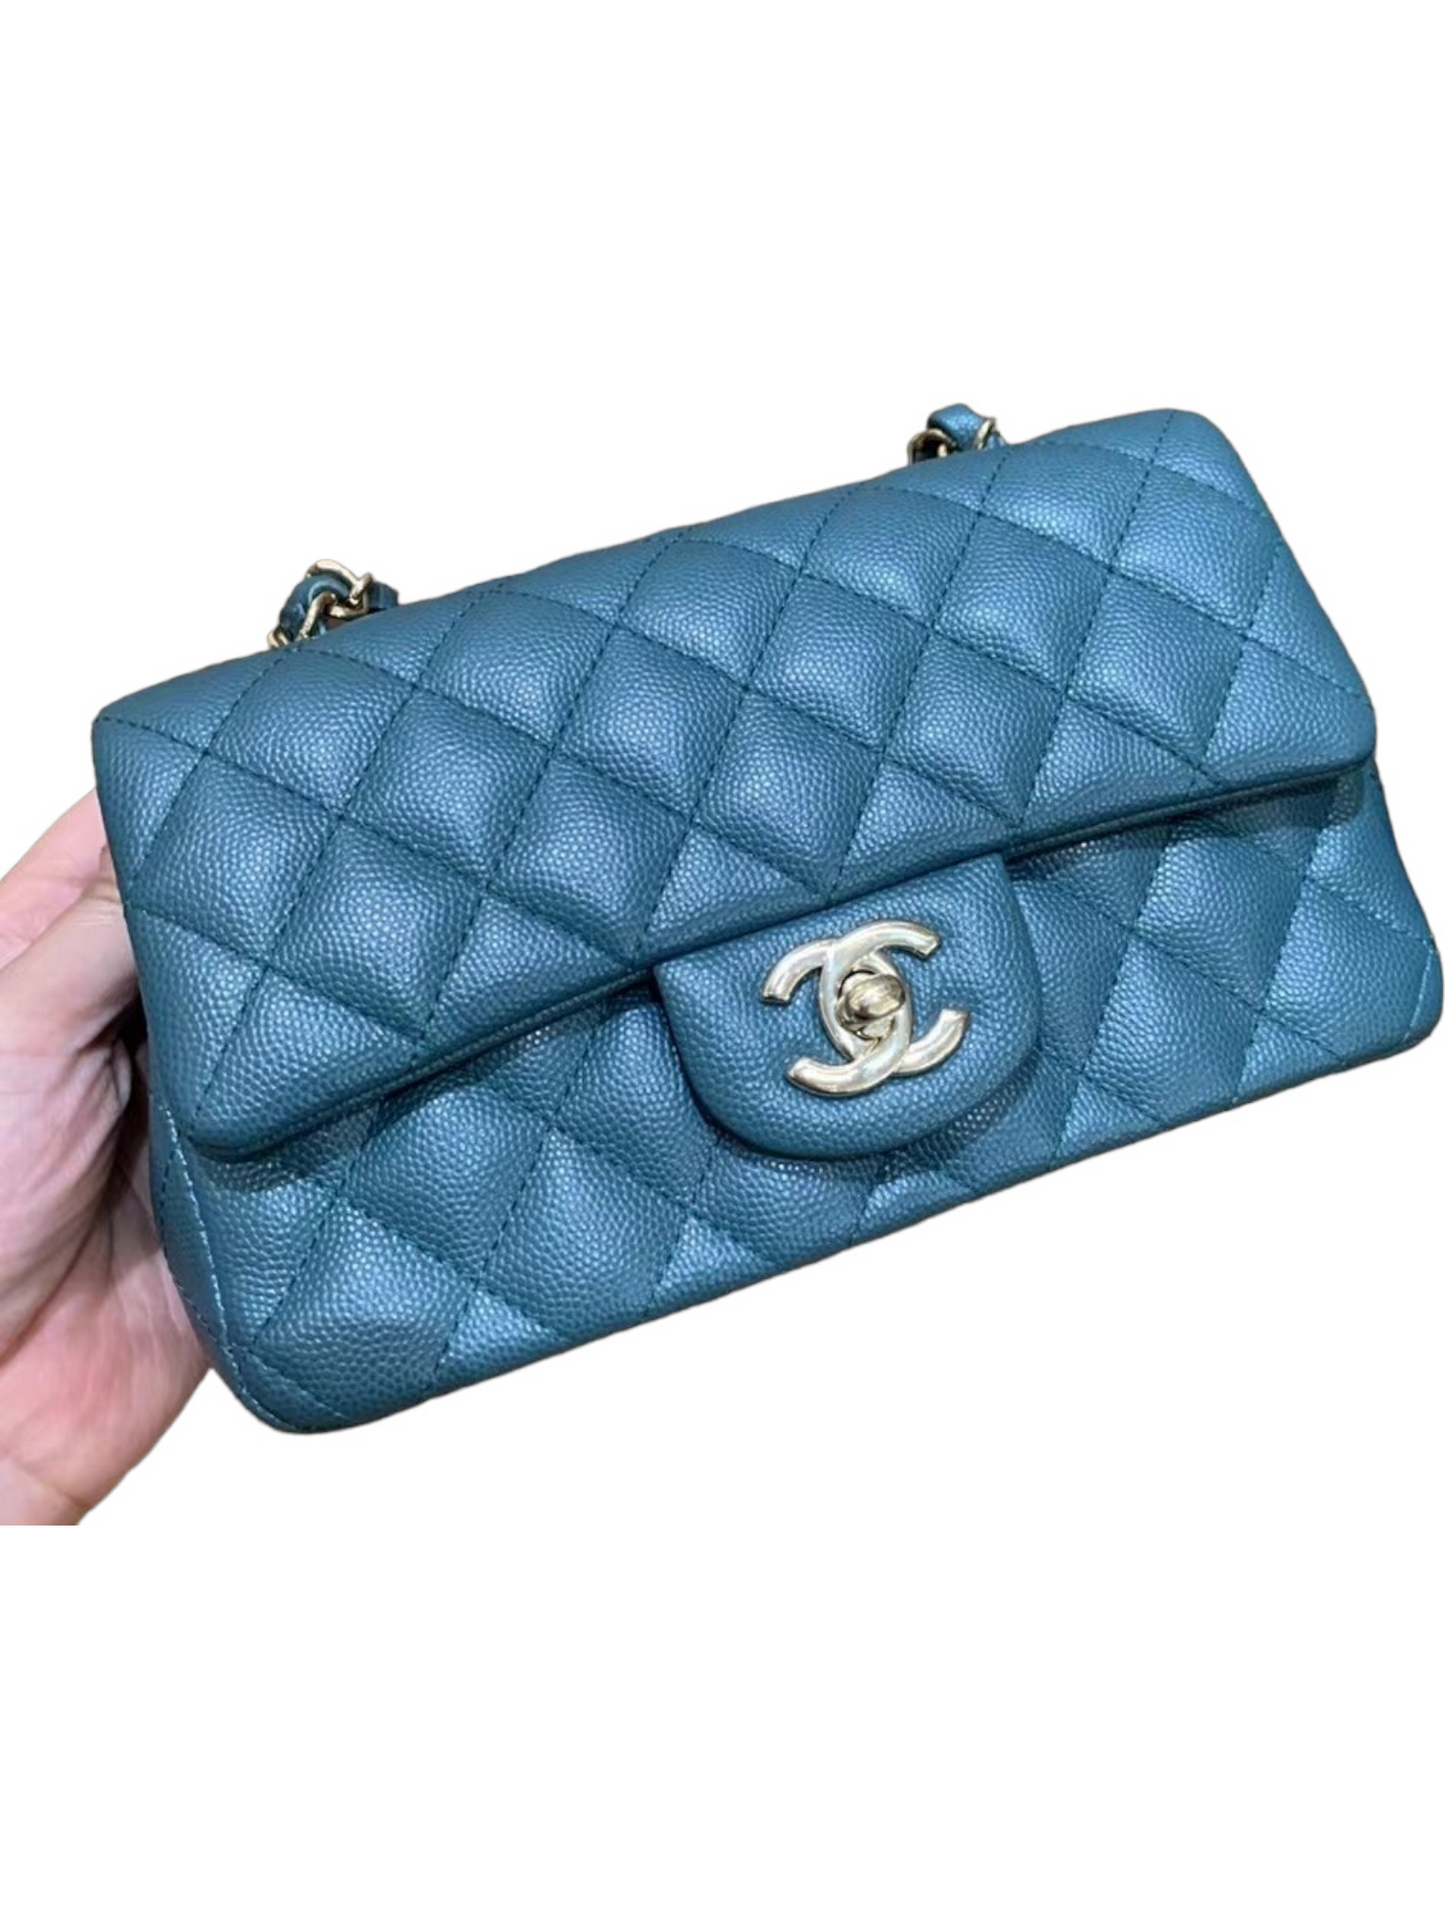 Chanel Mini Rectangle, 17B Dark Turquoise Green Caviar Leather with Shiny Gold Hardware